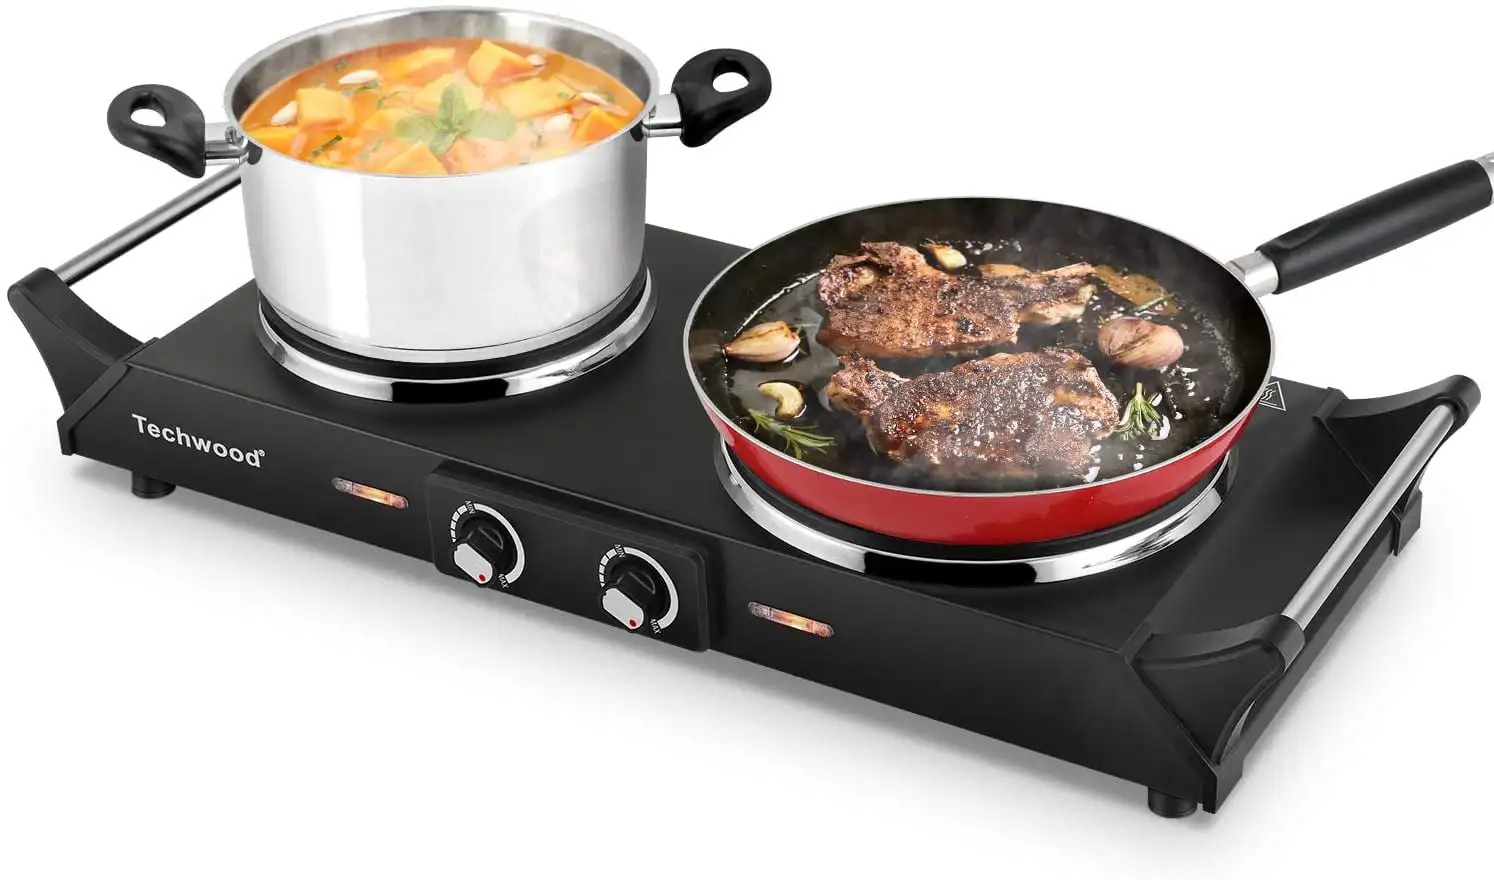 Hot Plate  Single Burner 1800W Portable Burner for Cooking with Adjustable Temperature & Stay Cool Handles, Non-Slip Rubber Feet